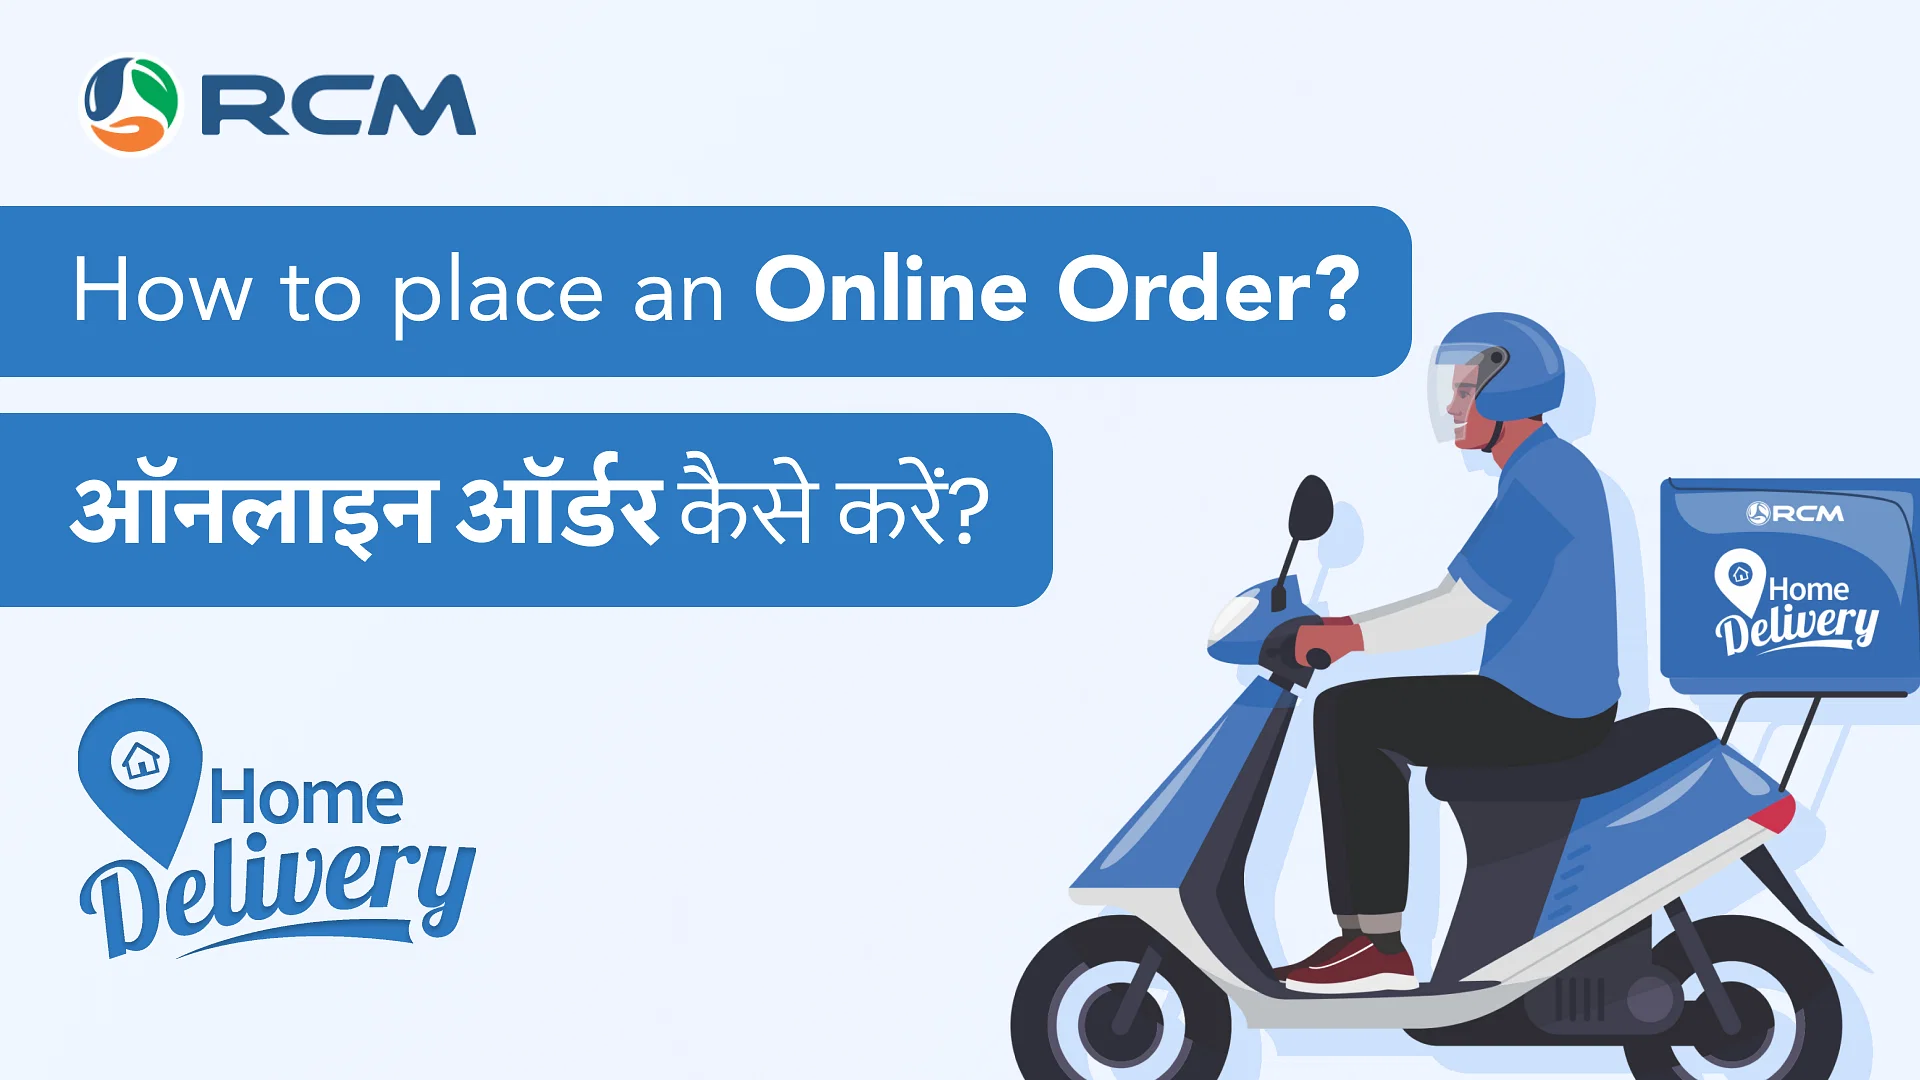 How to place an Online Order on Gmall Inda App [Hindi]